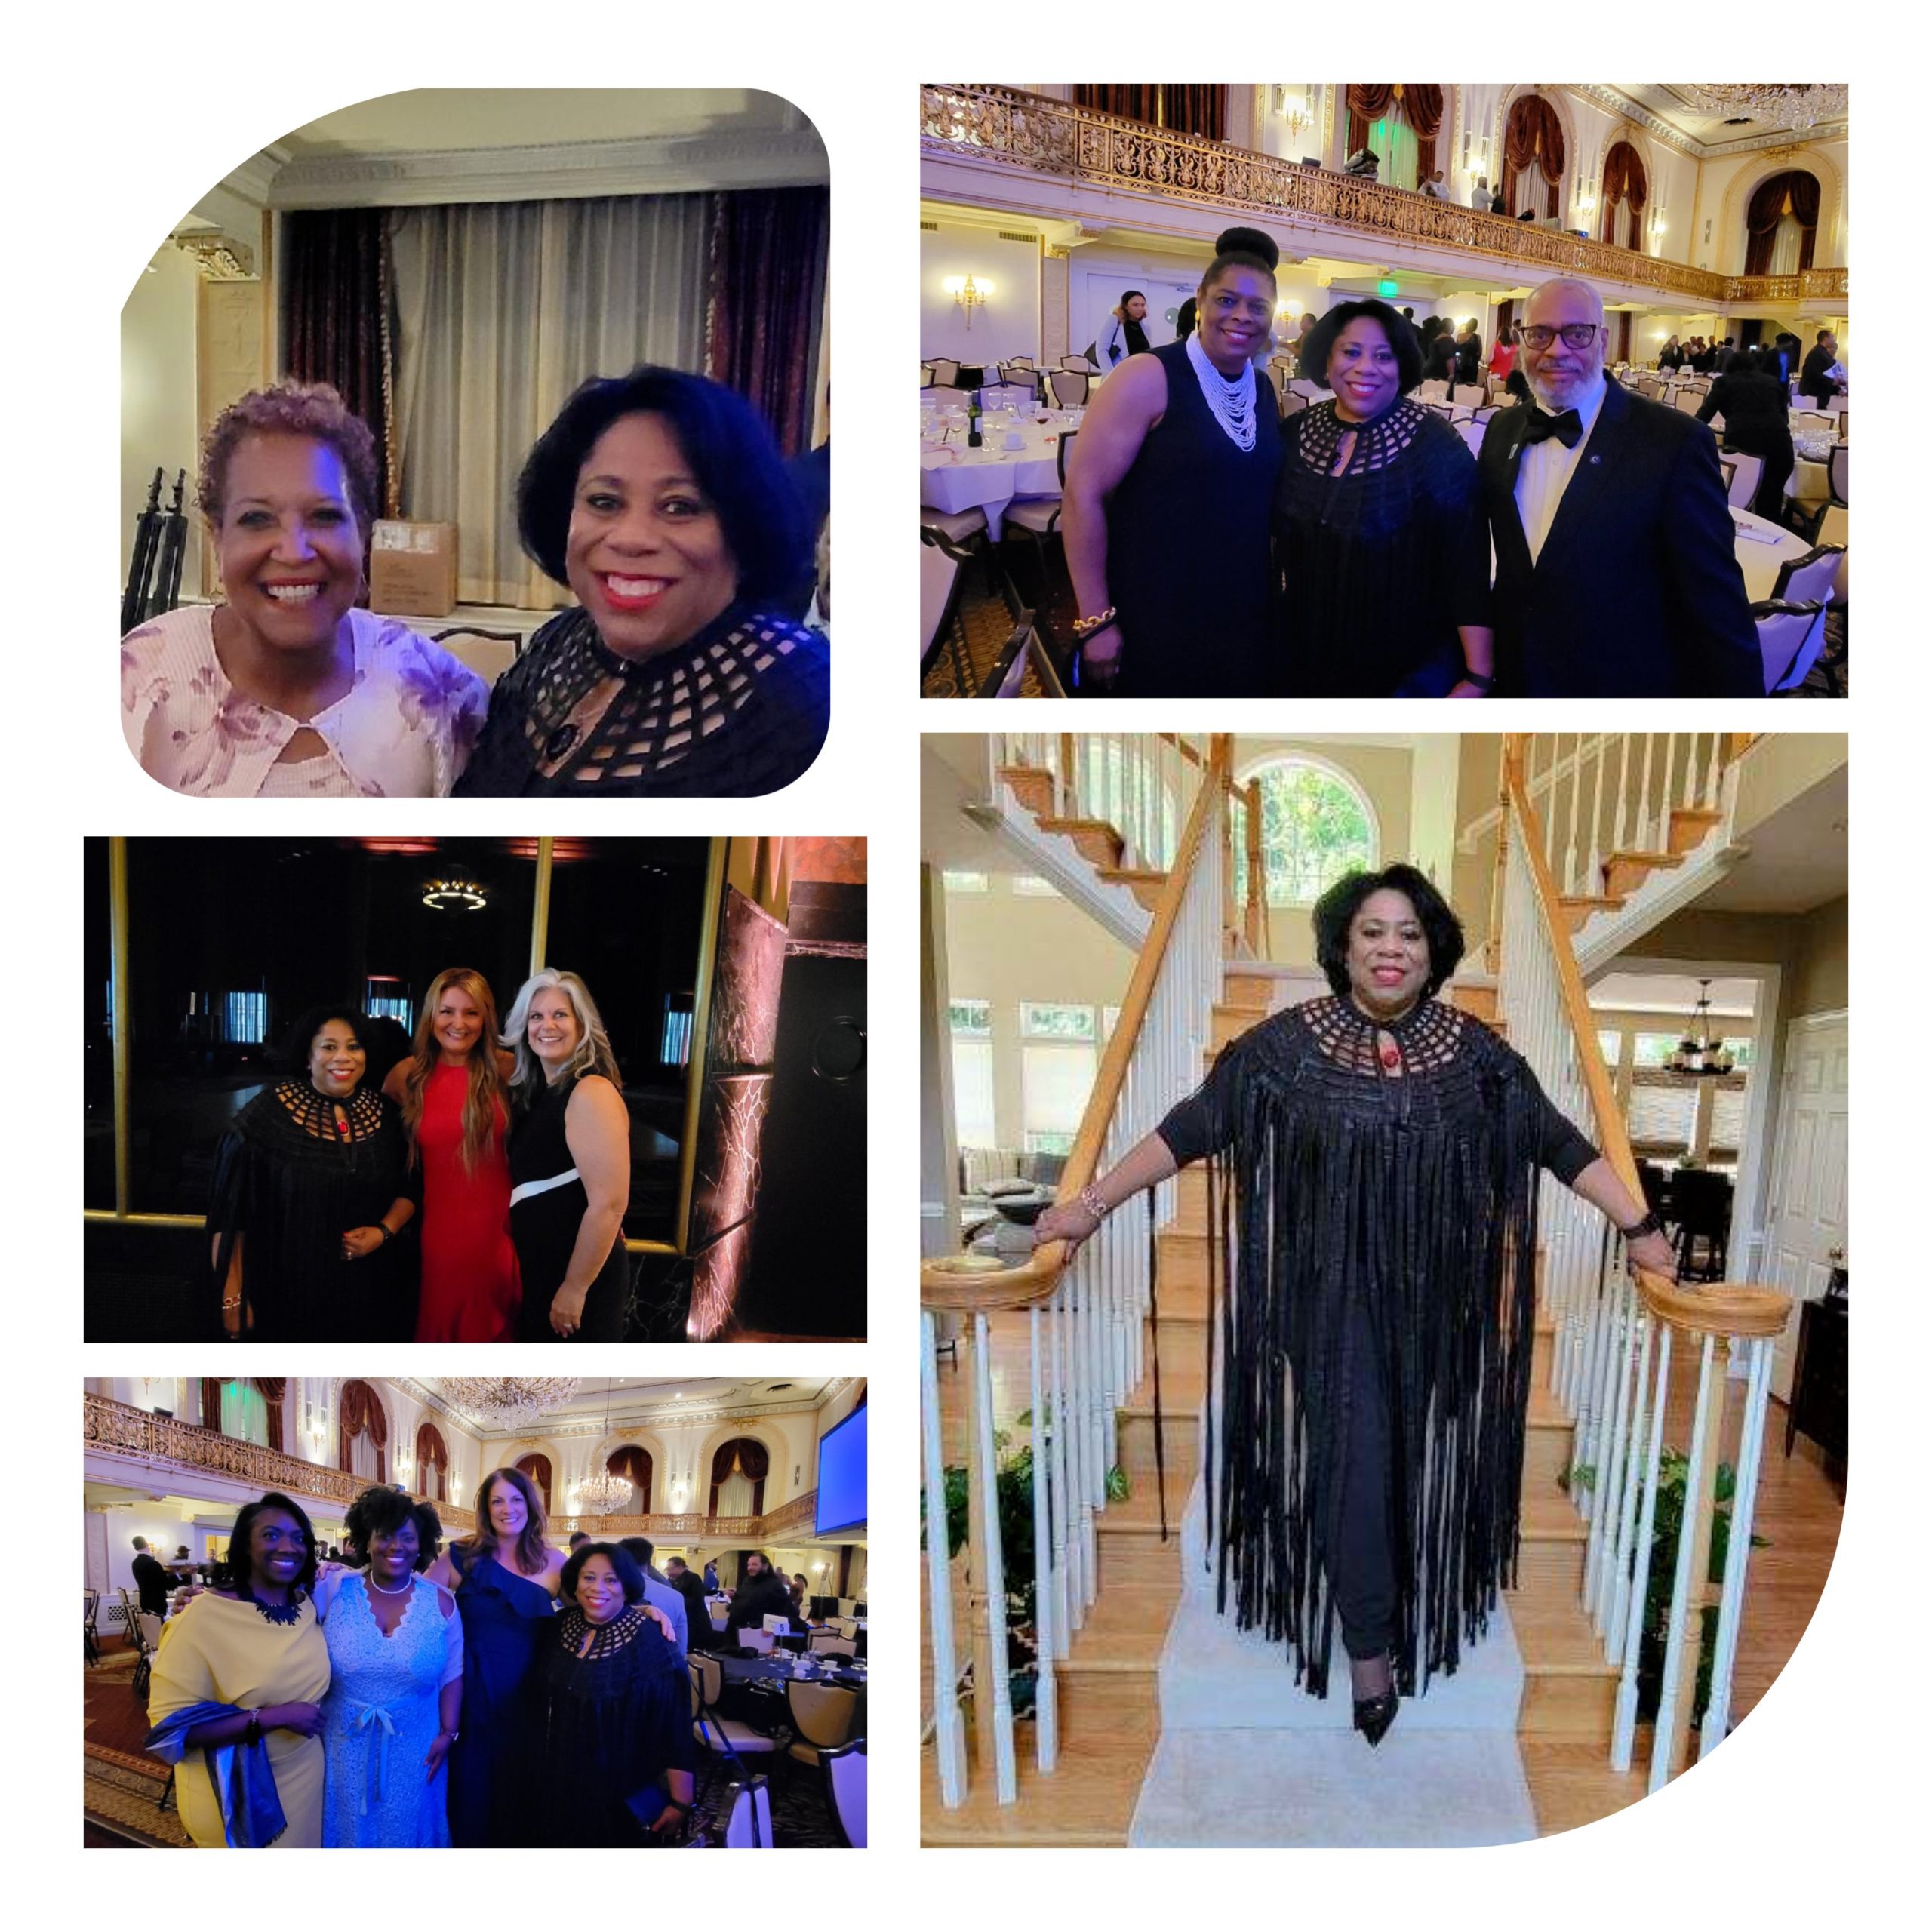 Dr. Harvey-Smith in a collage of photos from the Pittsburgh Black Tie Gala